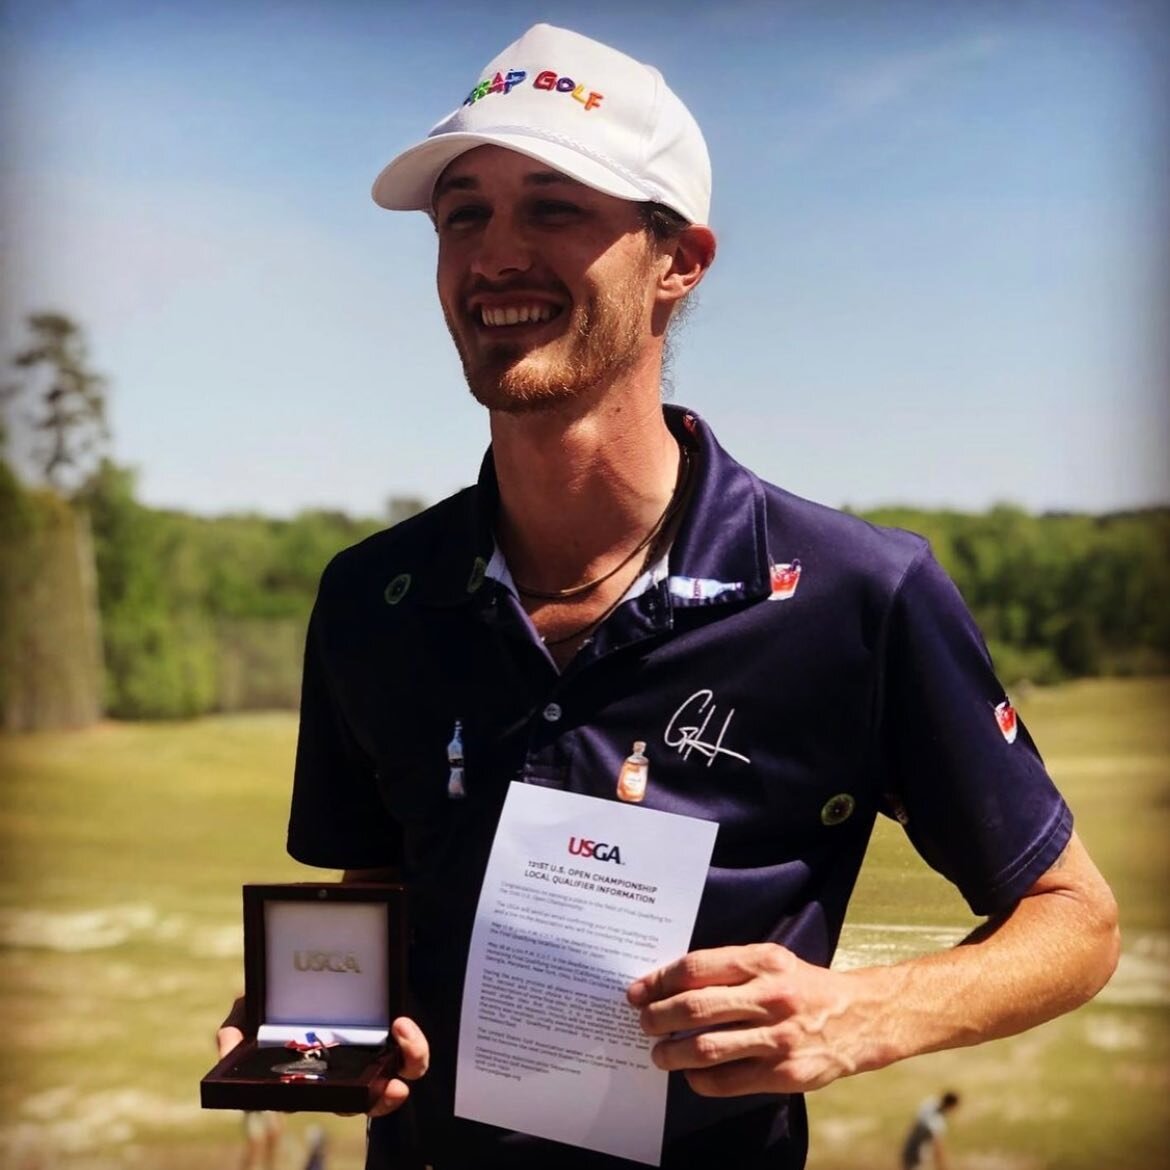 Players who have competed in Gator Tour events experienced special things this past week. 

Today, Marc Casullo came in 4th to qualify at the River Landing U.S. Open Qualifier! 

2 of the 5 to qualify from Duke University&rsquo;s U.S. Open Qualifier 